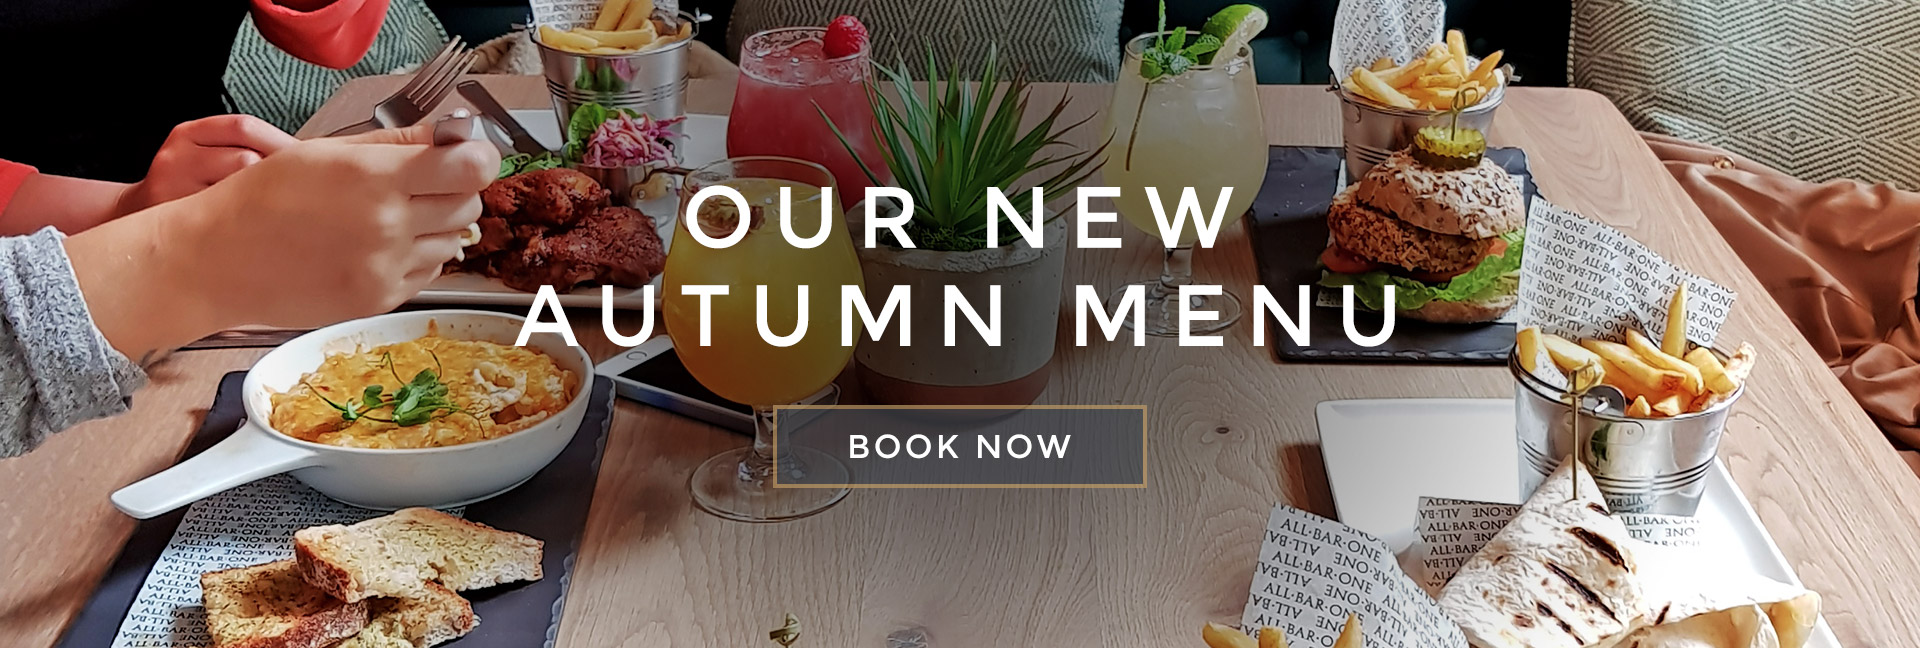 Our new Autumn menu at All Bar One Butlers Wharf - Book now